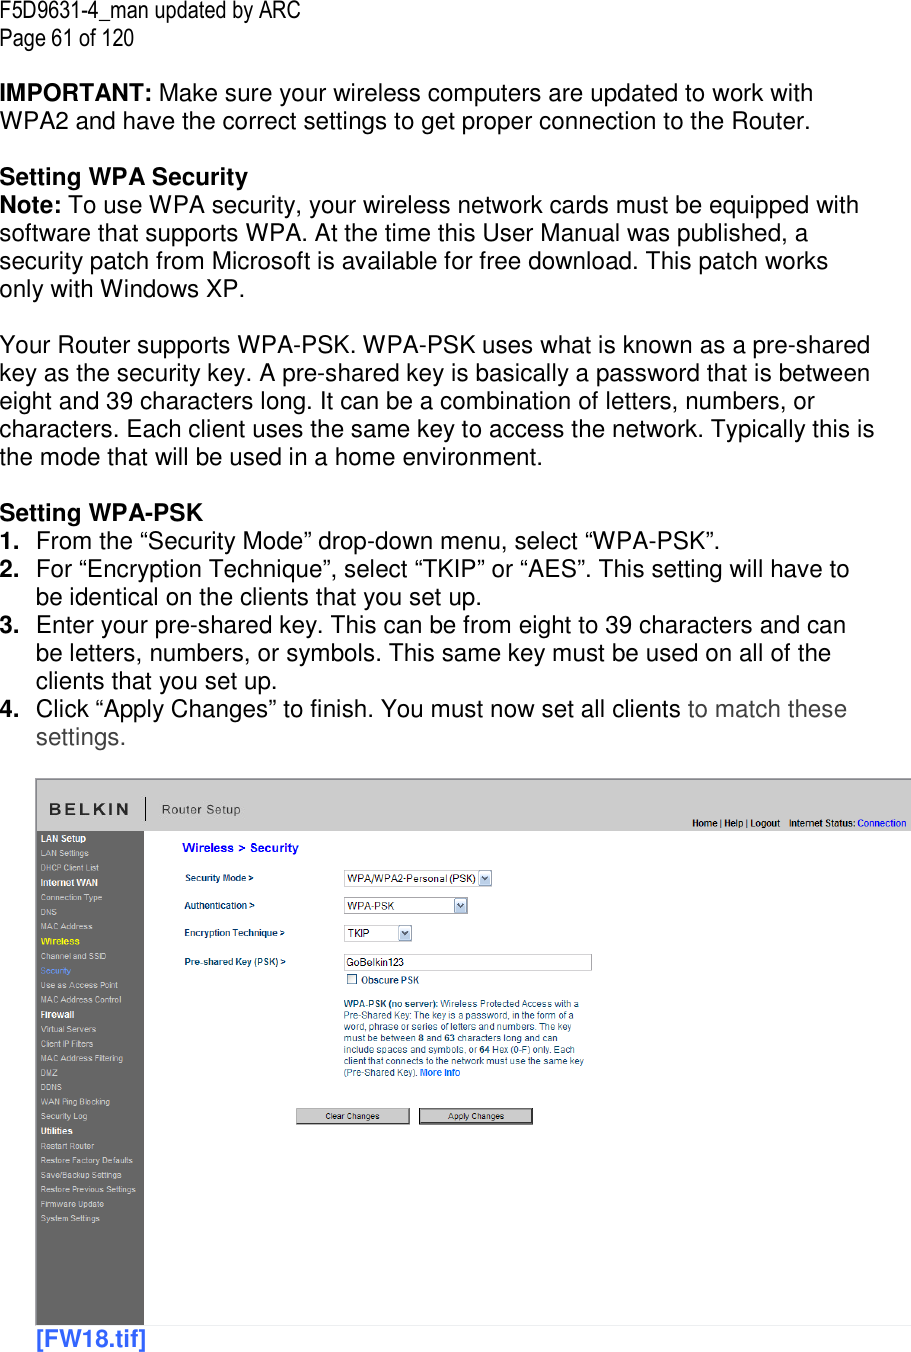 F5D9631-4_man updated by ARC Page 61 of 120  IMPORTANT: Make sure your wireless computers are updated to work with WPA2 and have the correct settings to get proper connection to the Router.  Setting WPA Security Note: To use WPA security, your wireless network cards must be equipped with software that supports WPA. At the time this User Manual was published, a security patch from Microsoft is available for free download. This patch works only with Windows XP.   Your Router supports WPA-PSK. WPA-PSK uses what is known as a pre-shared key as the security key. A pre-shared key is basically a password that is between eight and 39 characters long. It can be a combination of letters, numbers, or characters. Each client uses the same key to access the network. Typically this is the mode that will be used in a home environment.  Setting WPA-PSK 1.  From the “Security Mode” drop-down menu, select “WPA-PSK”. 2.  For “Encryption Technique”, select “TKIP” or “AES”. This setting will have to be identical on the clients that you set up. 3.  Enter your pre-shared key. This can be from eight to 39 characters and can be letters, numbers, or symbols. This same key must be used on all of the clients that you set up. 4.  Click “Apply Changes” to finish. You must now set all clients to match these settings.  [FW18.tif]  